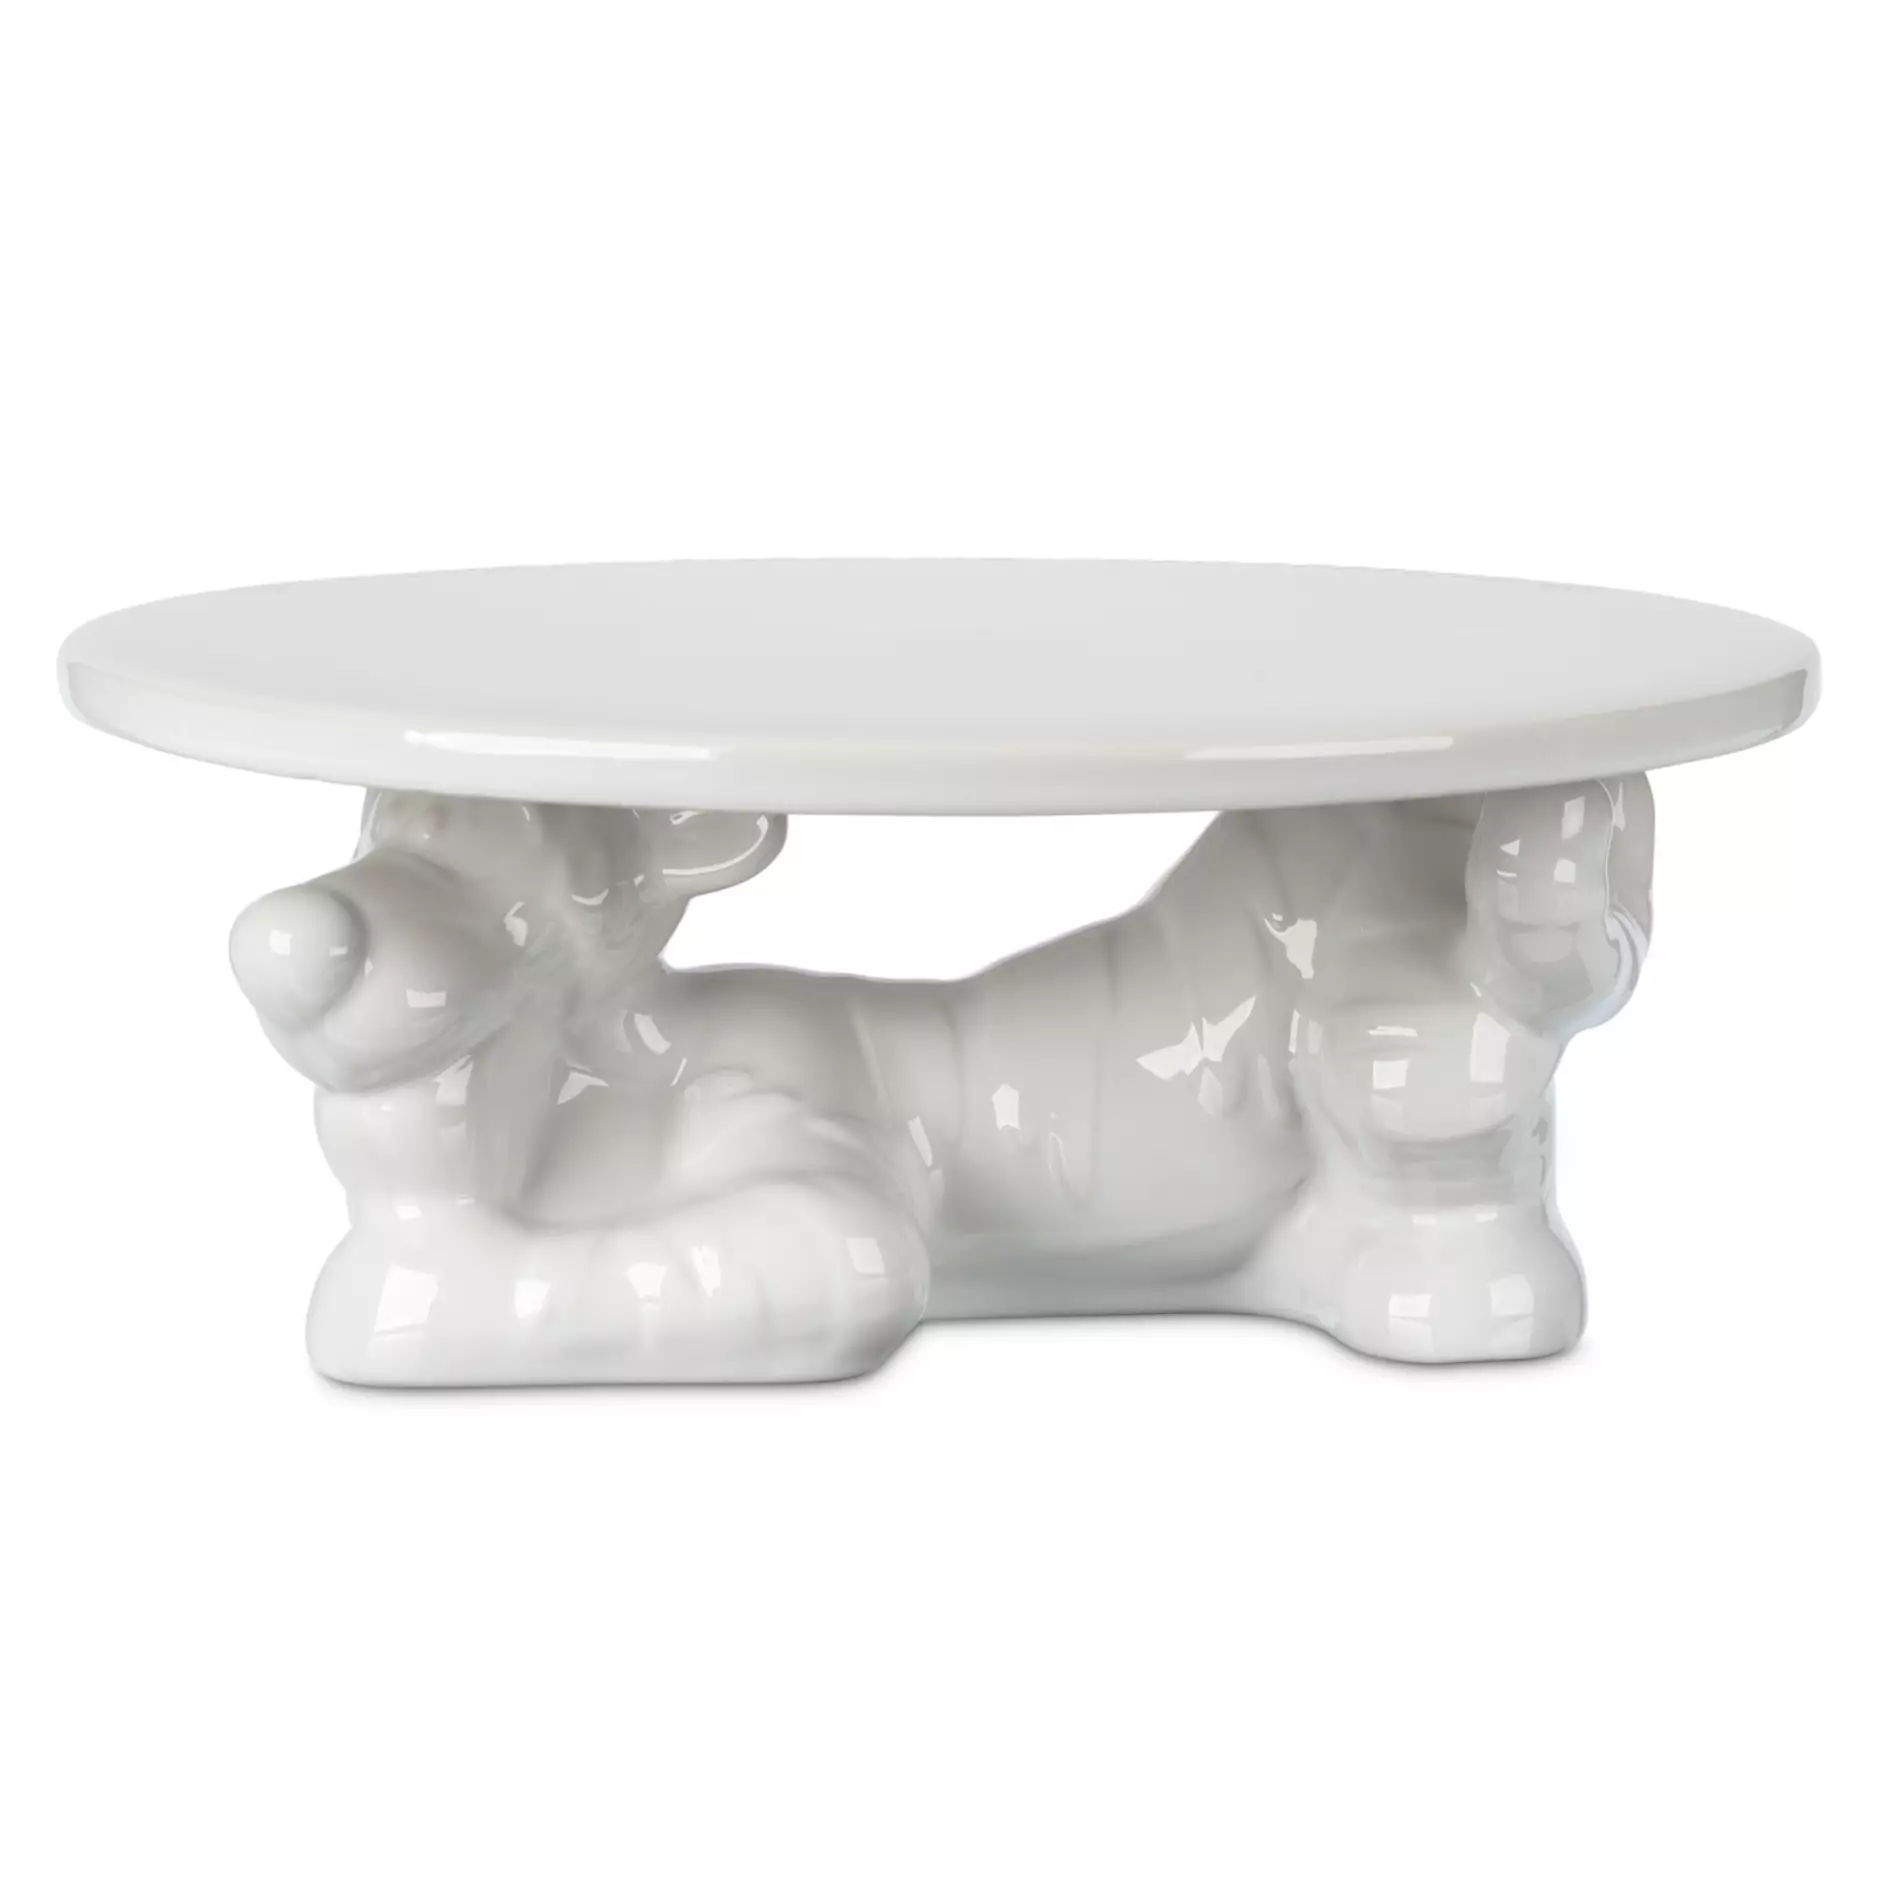 Tigger Figural Cake Stand Official shopDisney